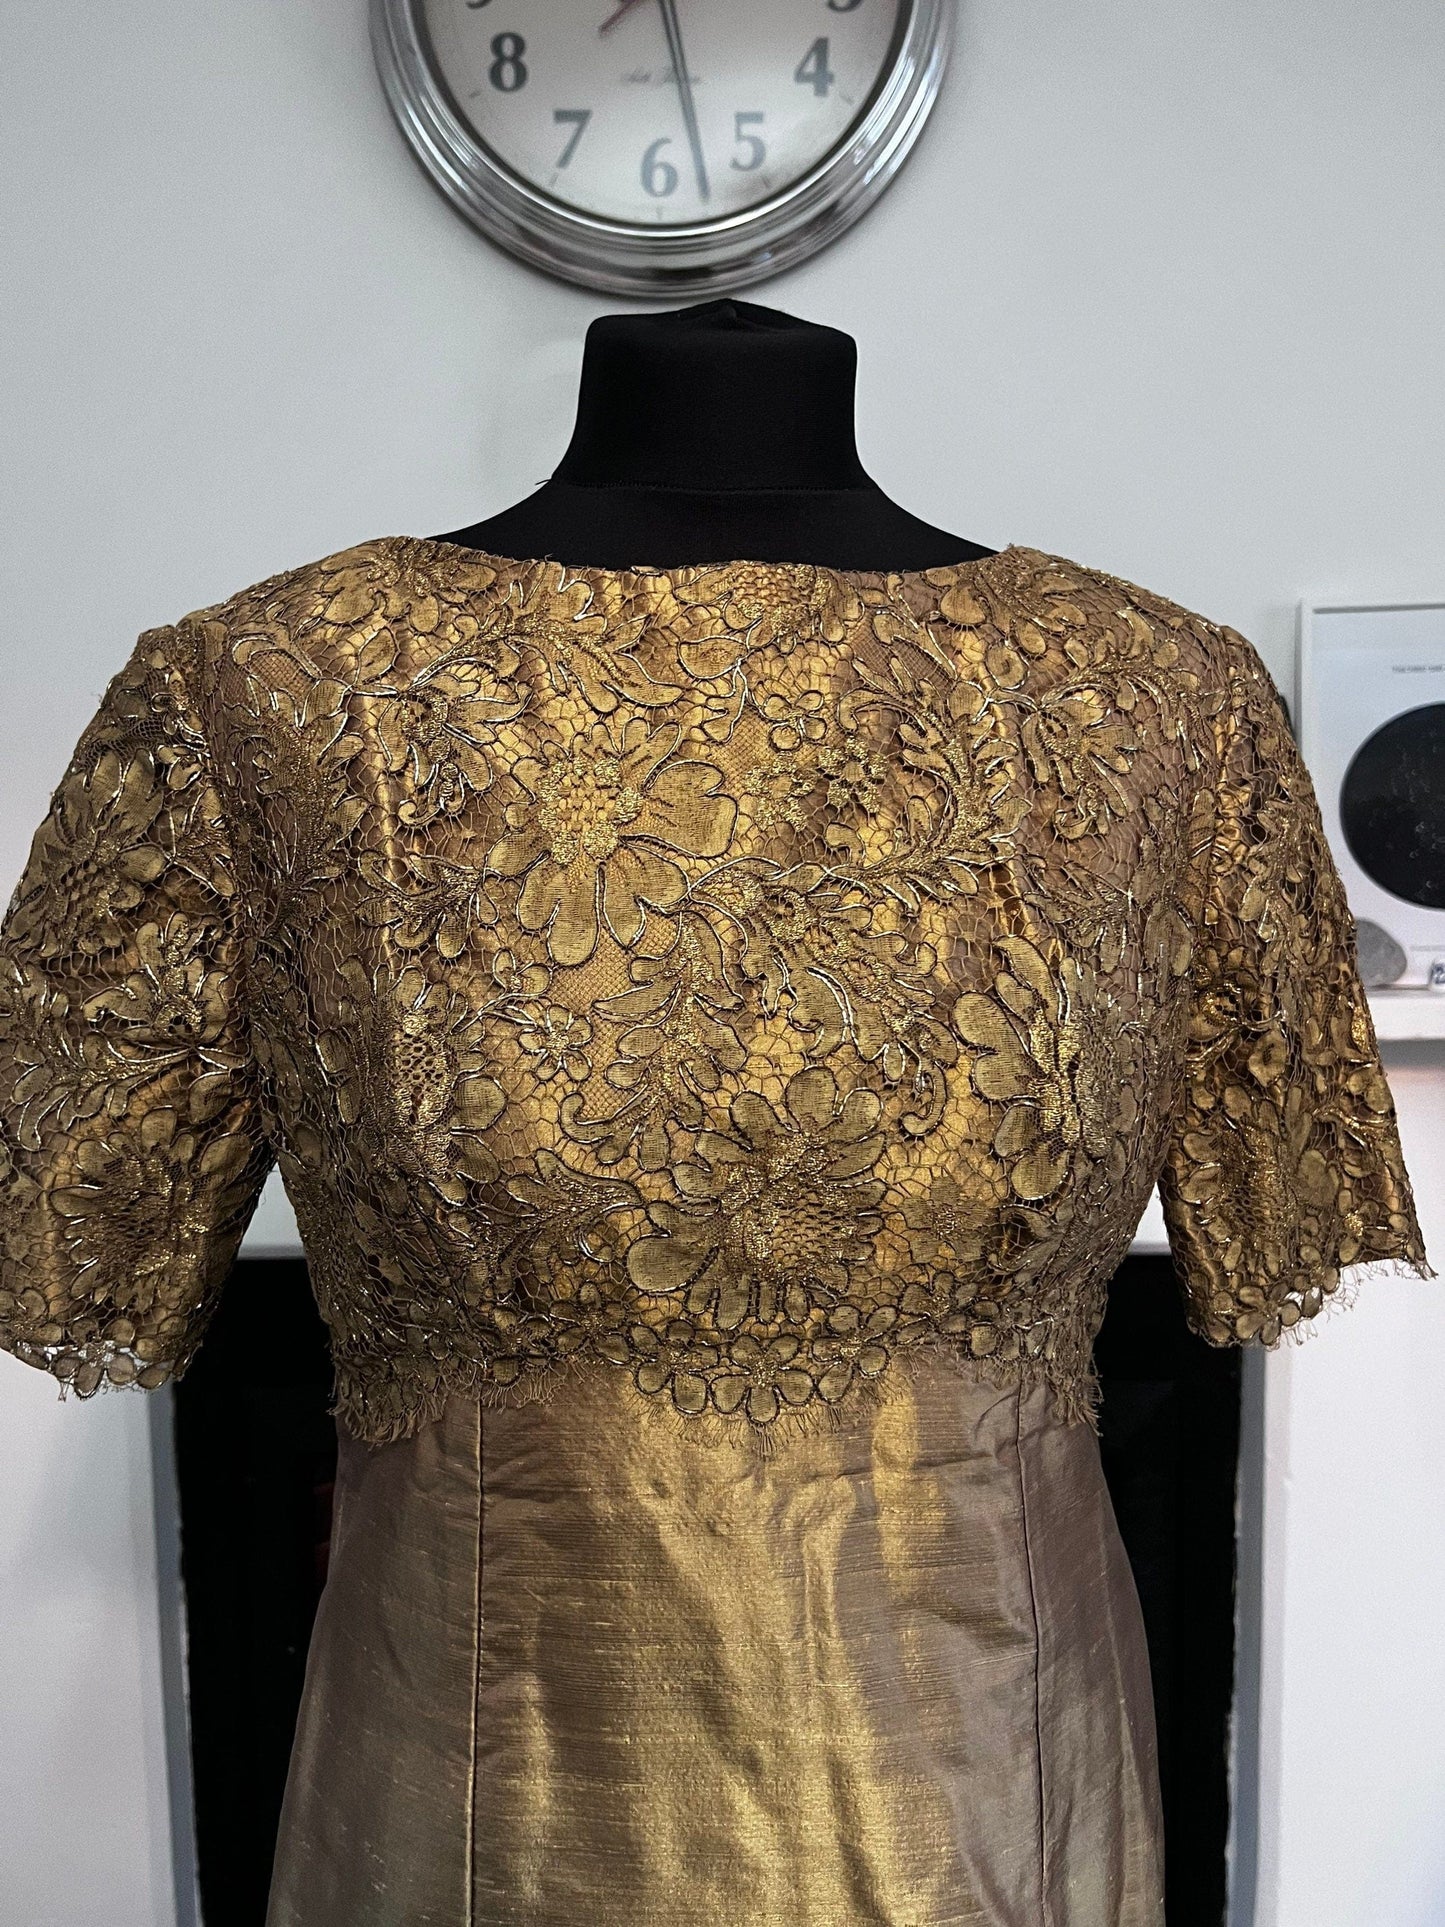 Vintage Silk Dress Bronze Gold Silk Lace Bodice Dress with gold thread lace details Immaculate Condition - 1950s Shot Silk